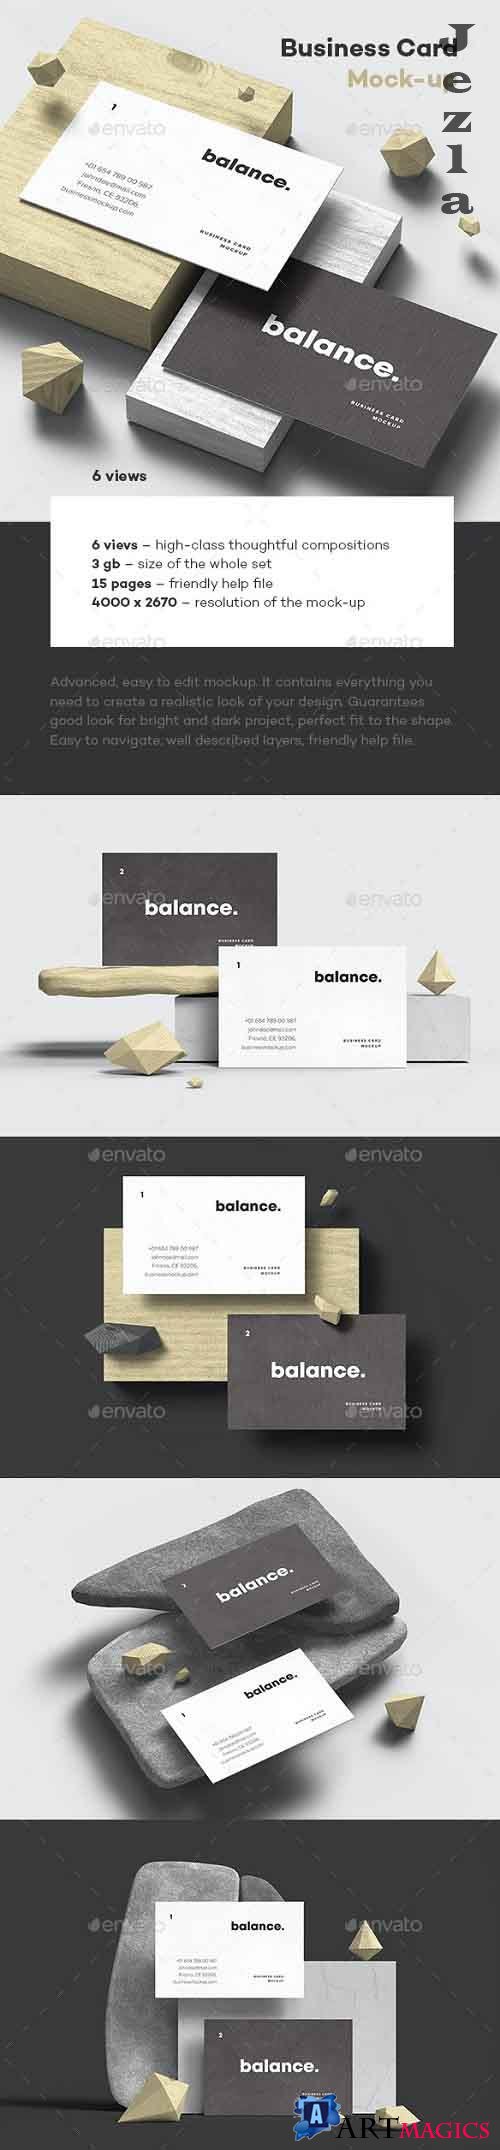 Business Card Mock-up 85x55 27958633